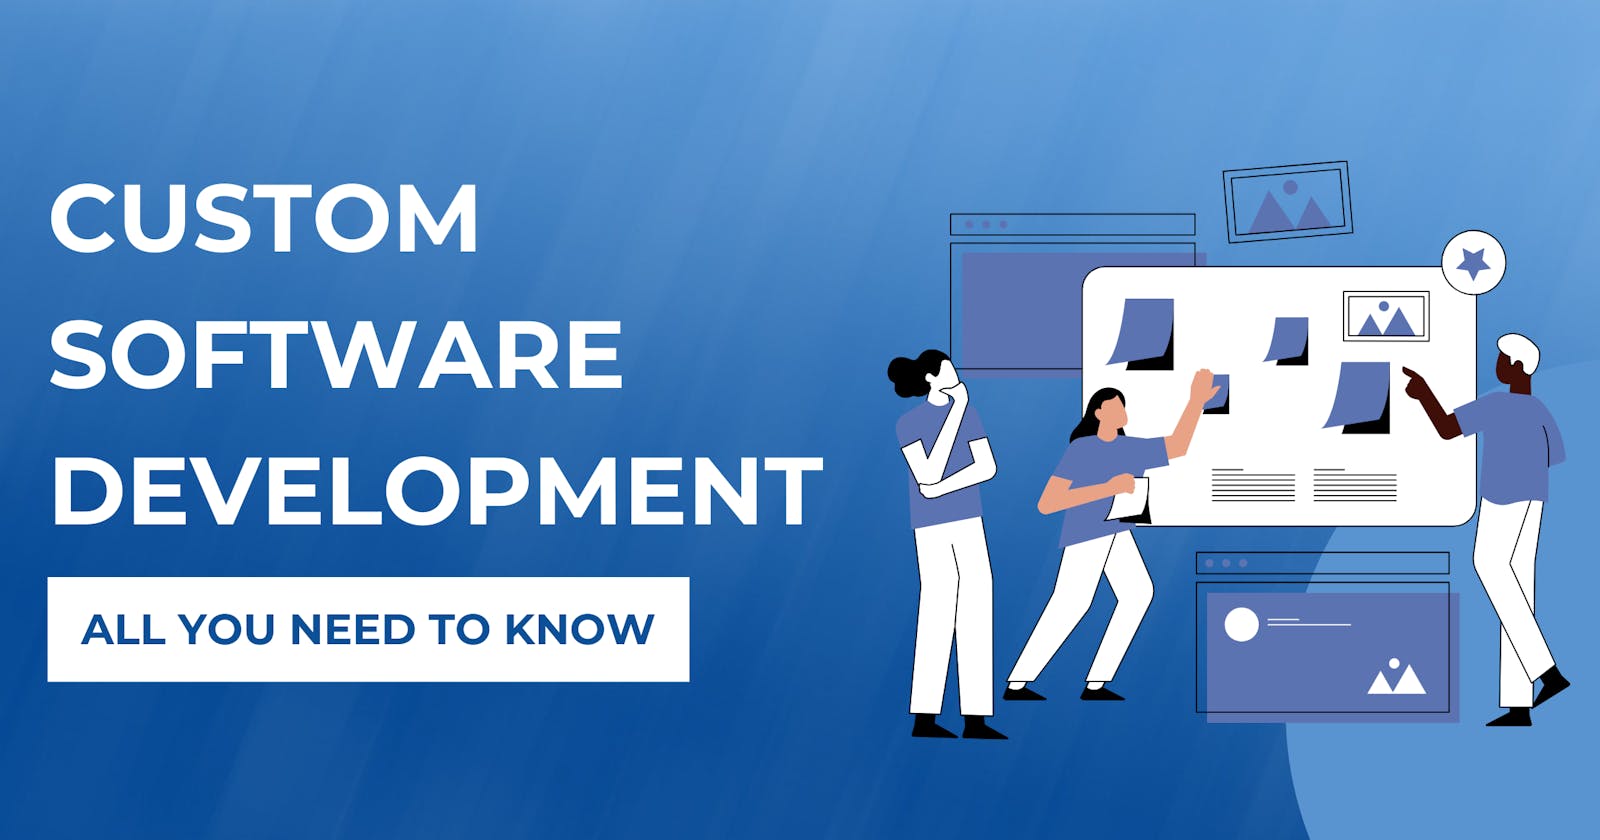 Custom Software Development: All You Need to Know